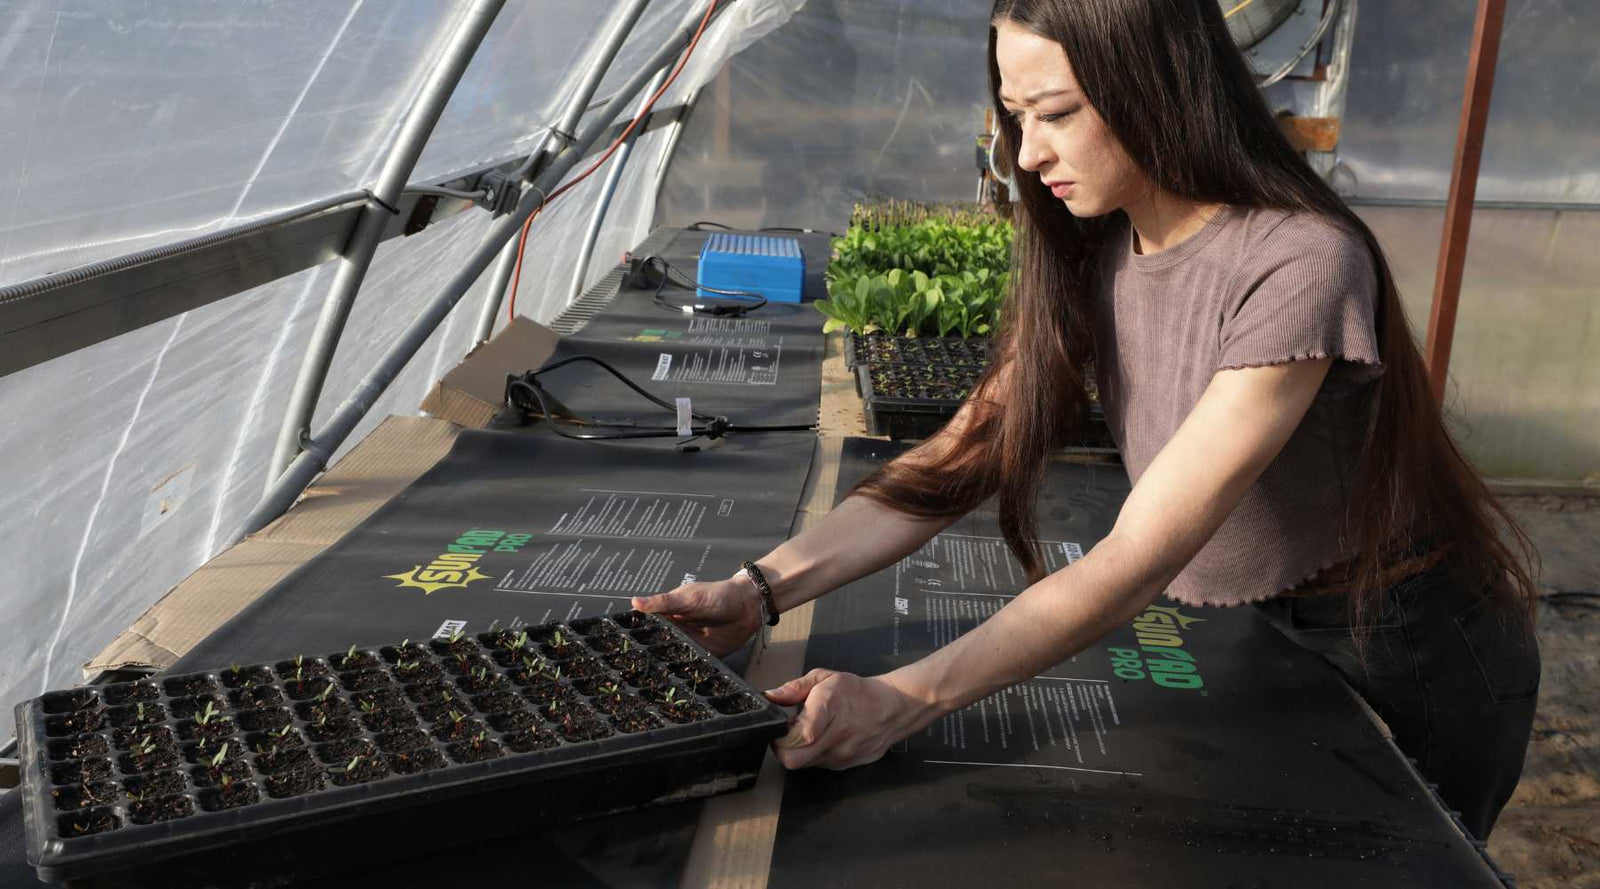 How To Use A Seedling Heat Mat The Right Way - Epic Gardening